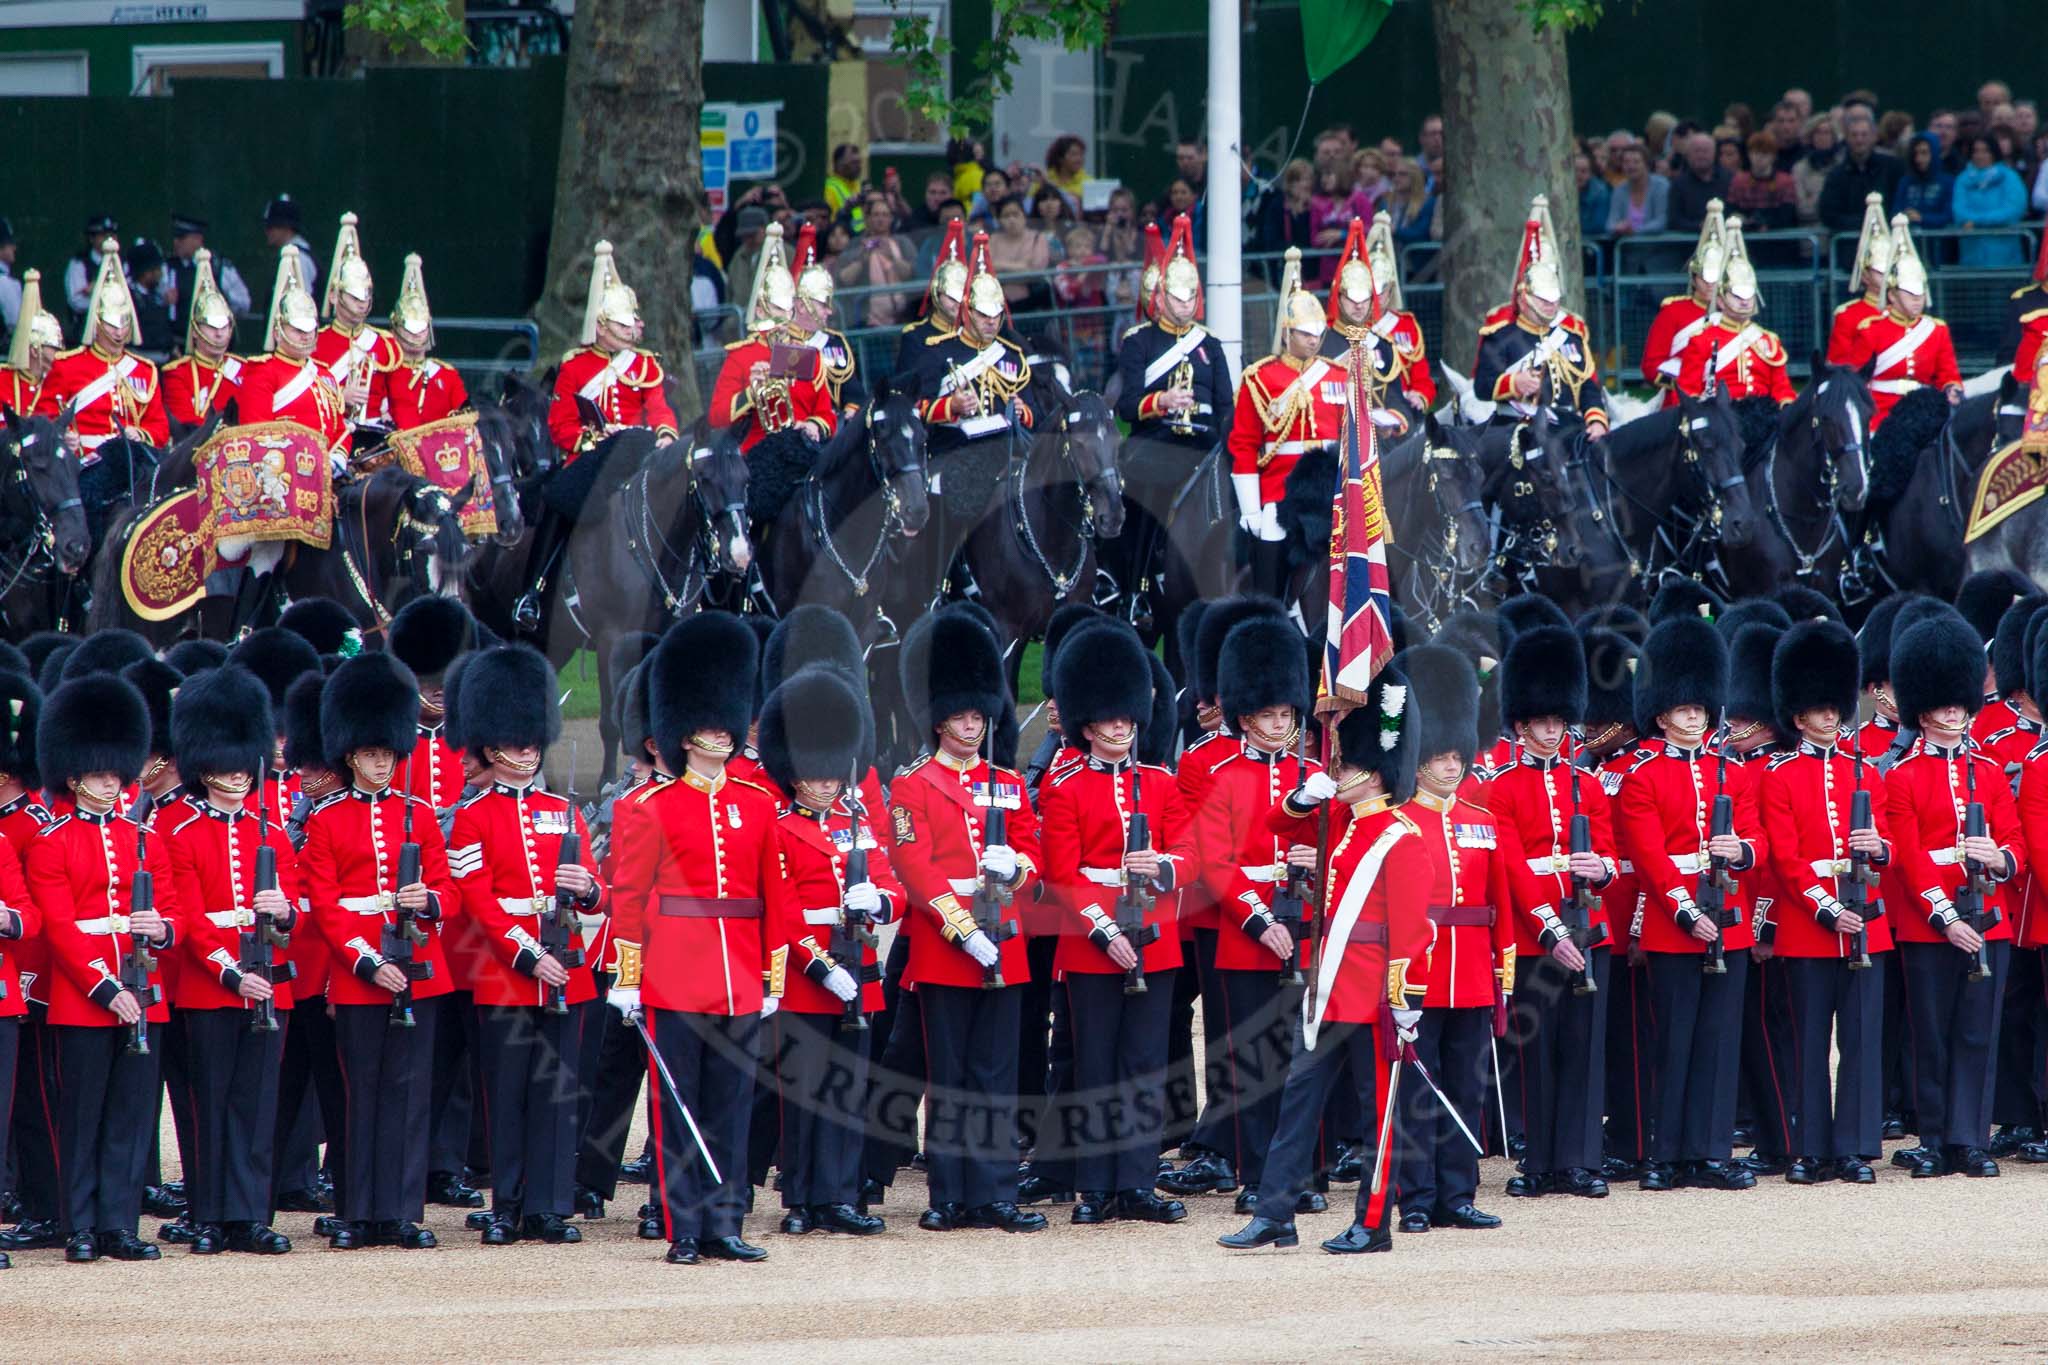 Major General's Review 2013: The Escort to the Colour troops the Colour past No. 5 Guard, F Company Scots Guards..
Horse Guards Parade, Westminster,
London SW1,

United Kingdom,
on 01 June 2013 at 11:24, image #429